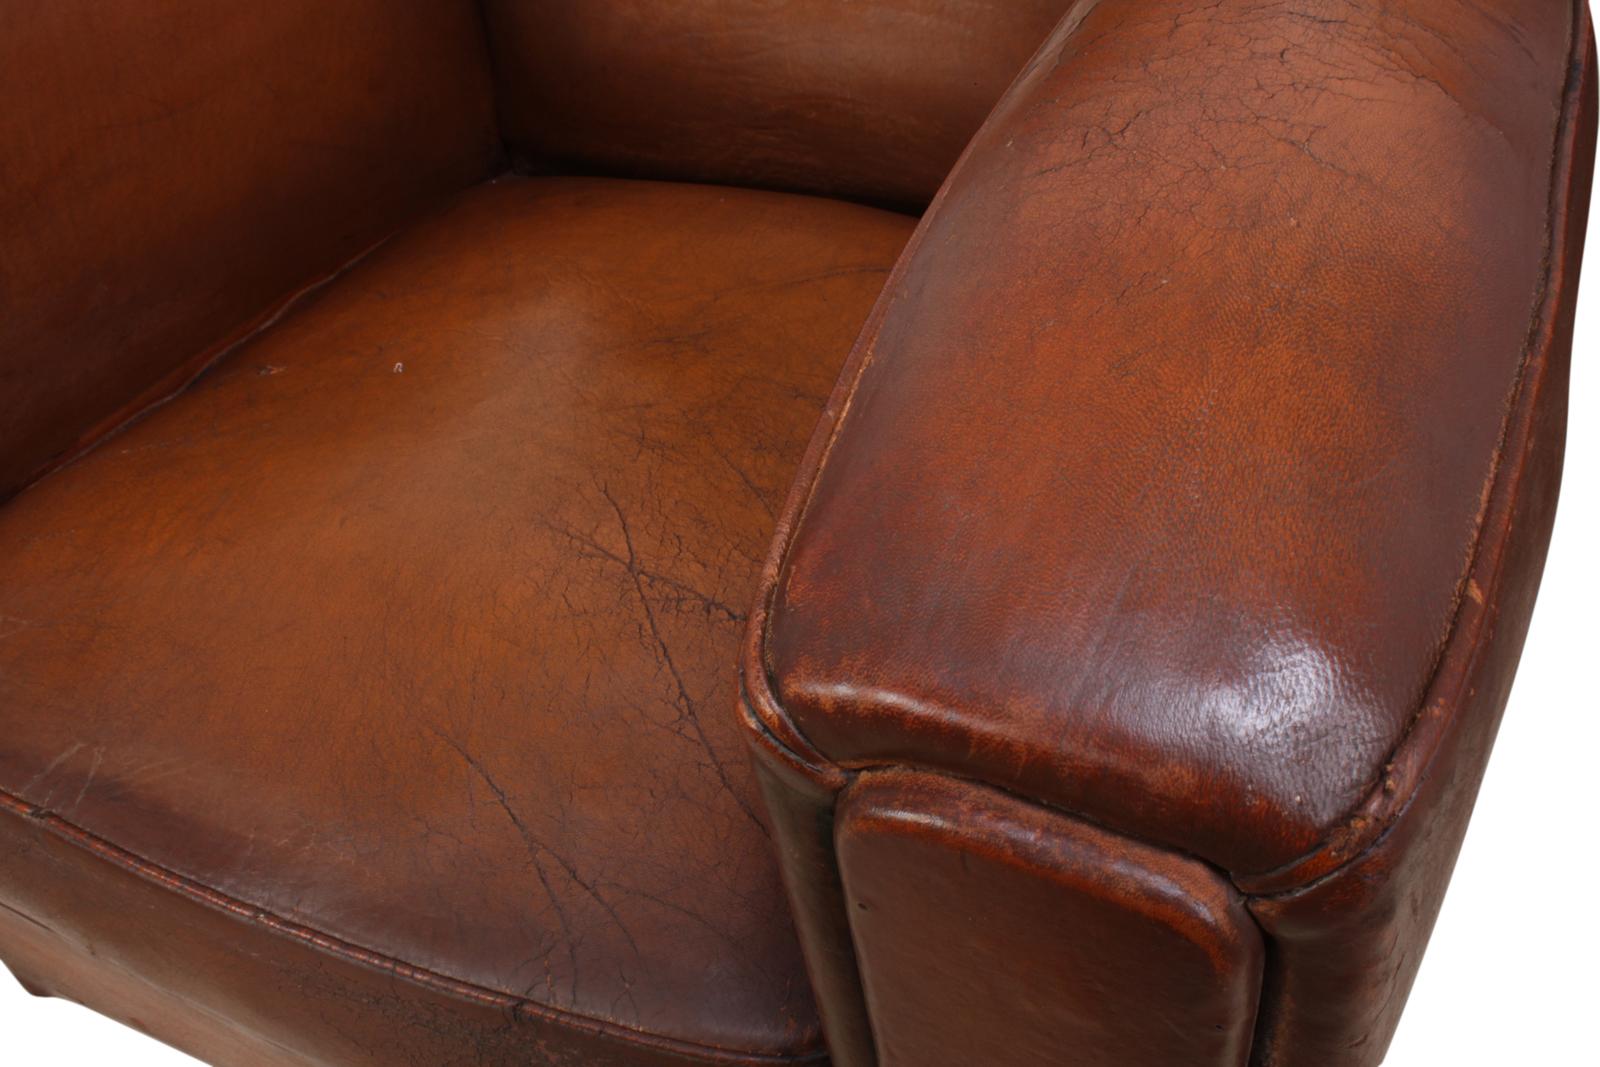 Pair of French leather club chairs
A pair of French leather club chairs, produced in the 1940s these club chairs have coil sprung seats and back they have been well looked after, and leather has been conditioned and fed and they are in good solid